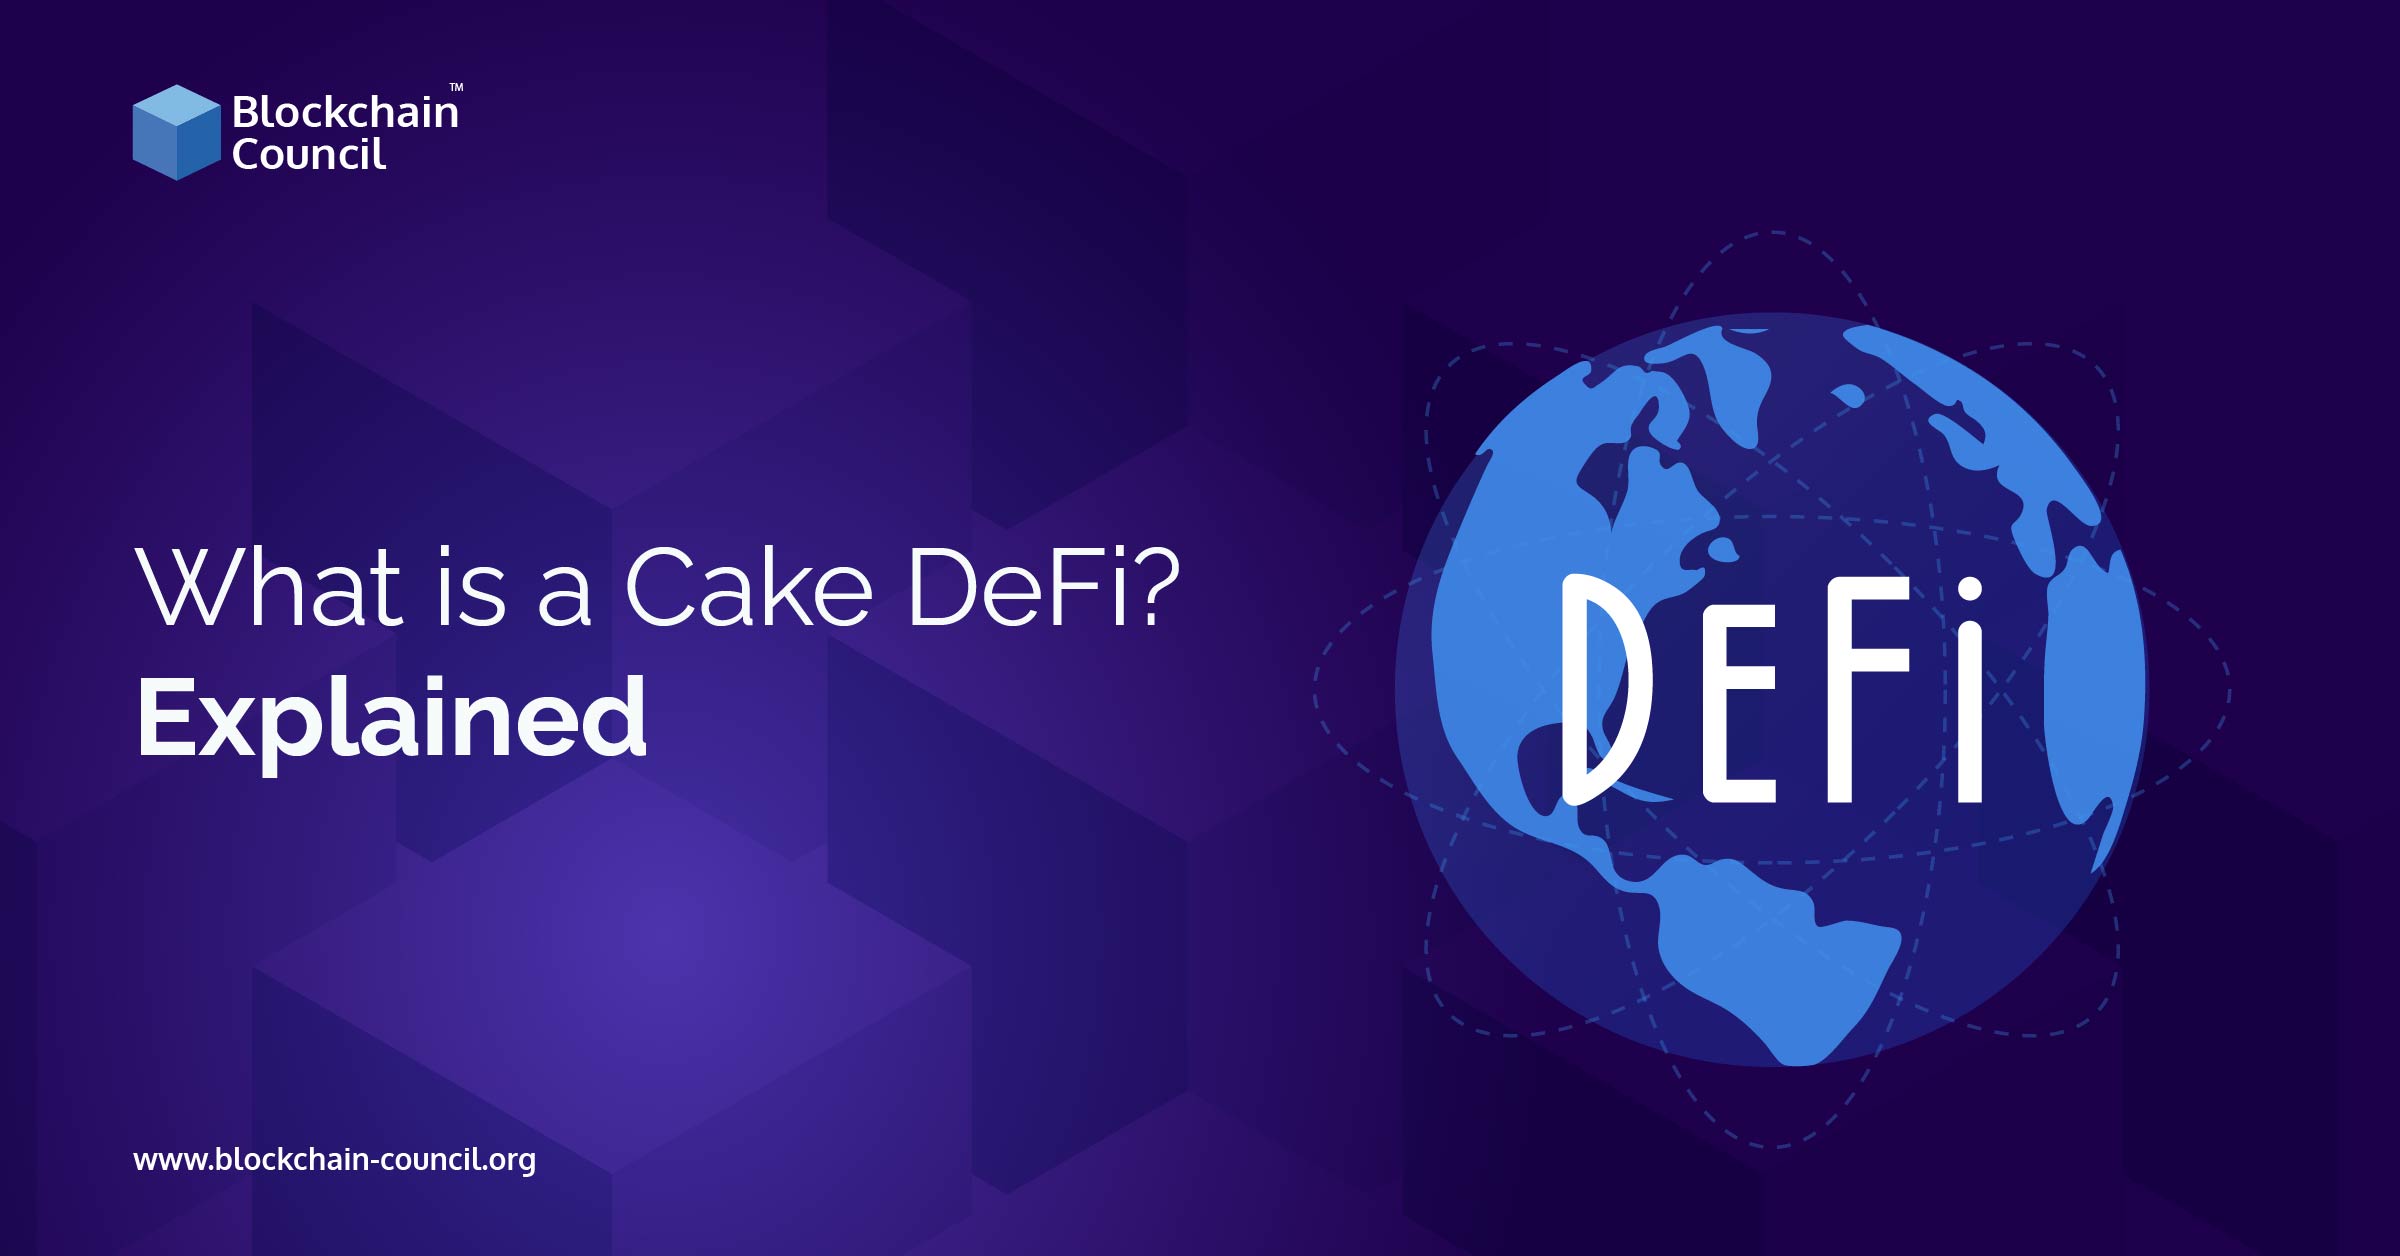 What is a Cake DeFi Explained